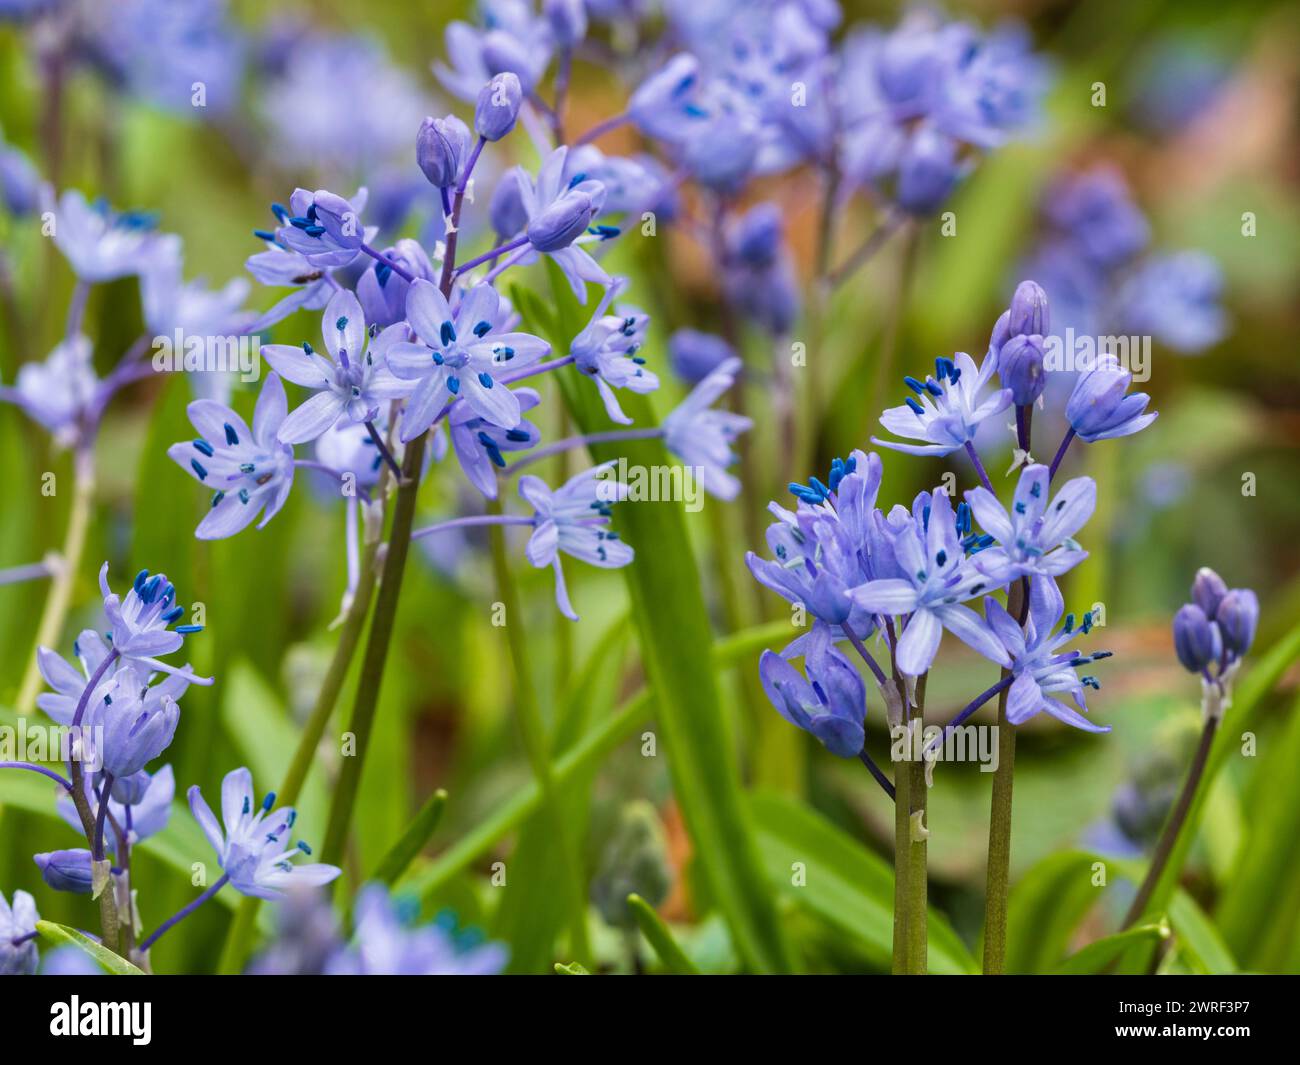 Pale violet blue flowers of the spring blooming Turkish squill squill, Scilla bithynica Stock Photo